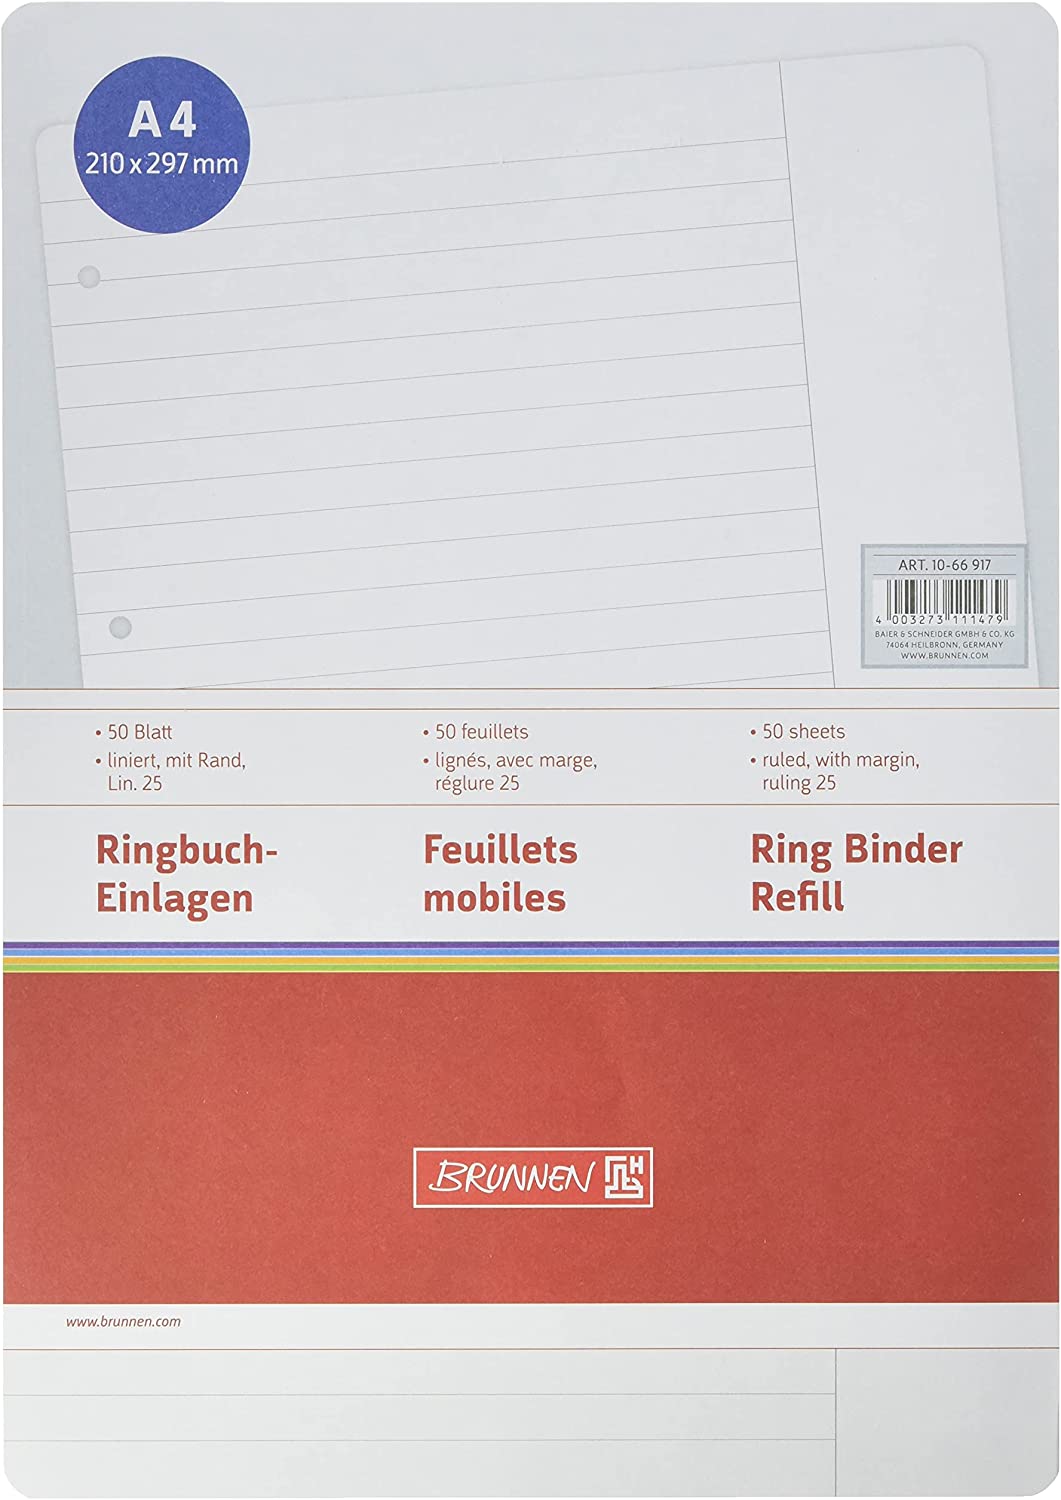 BRUNNEN A4 Ring Binder Loose Refill Pad 25 Lines per Page with Margin 50 Sheets RRP 5.19 CLEARANCE XL 1.99